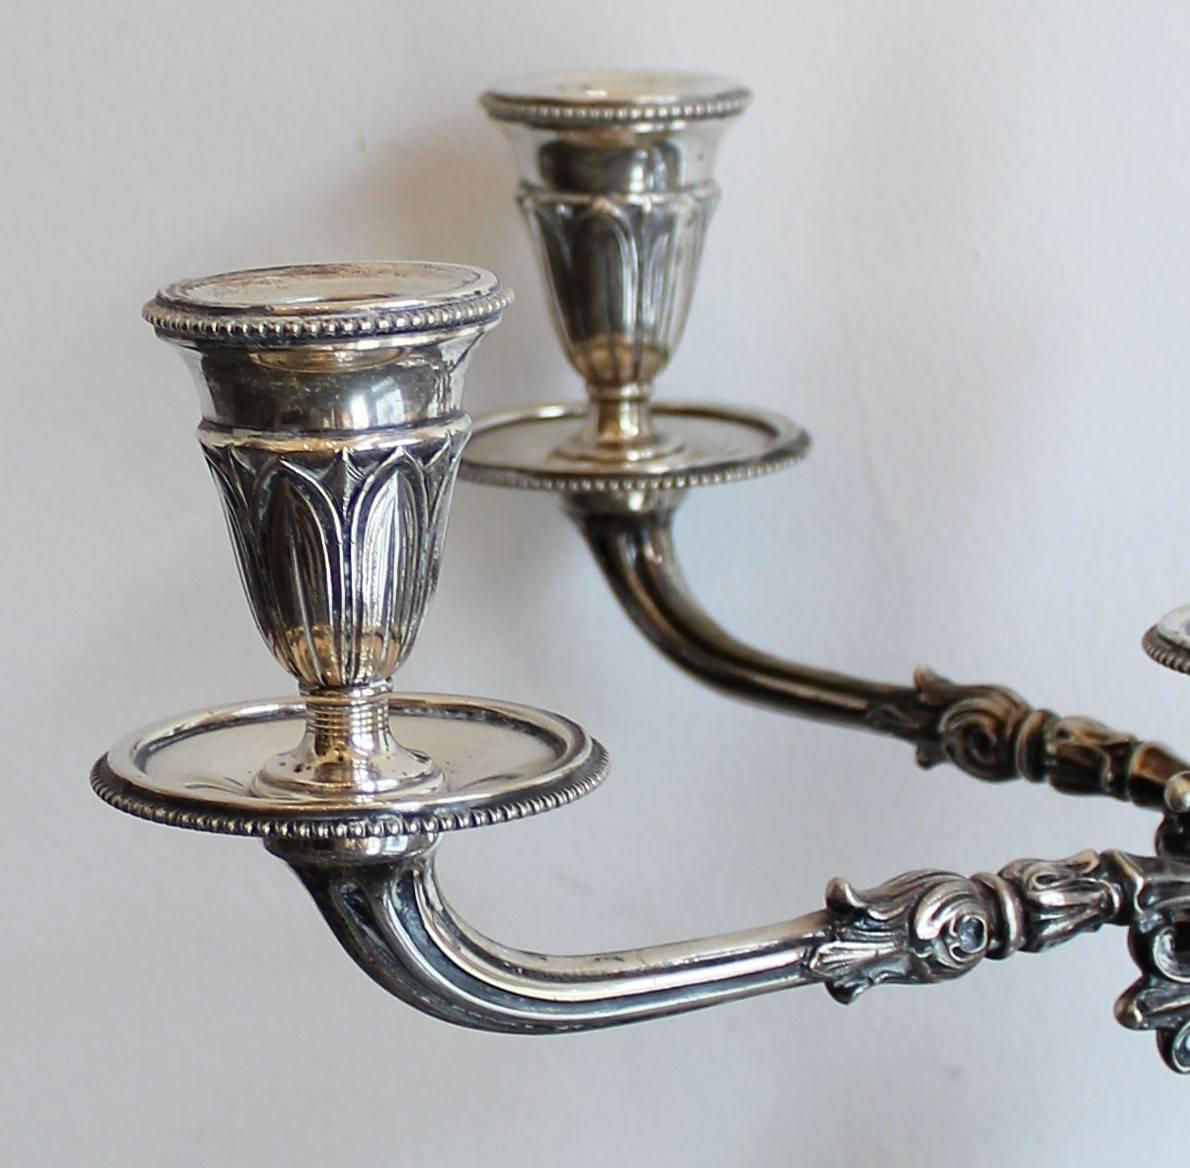 Pair of 19th Century Continental Silver Candelabra In Good Condition For Sale In Hamilton, Ontario